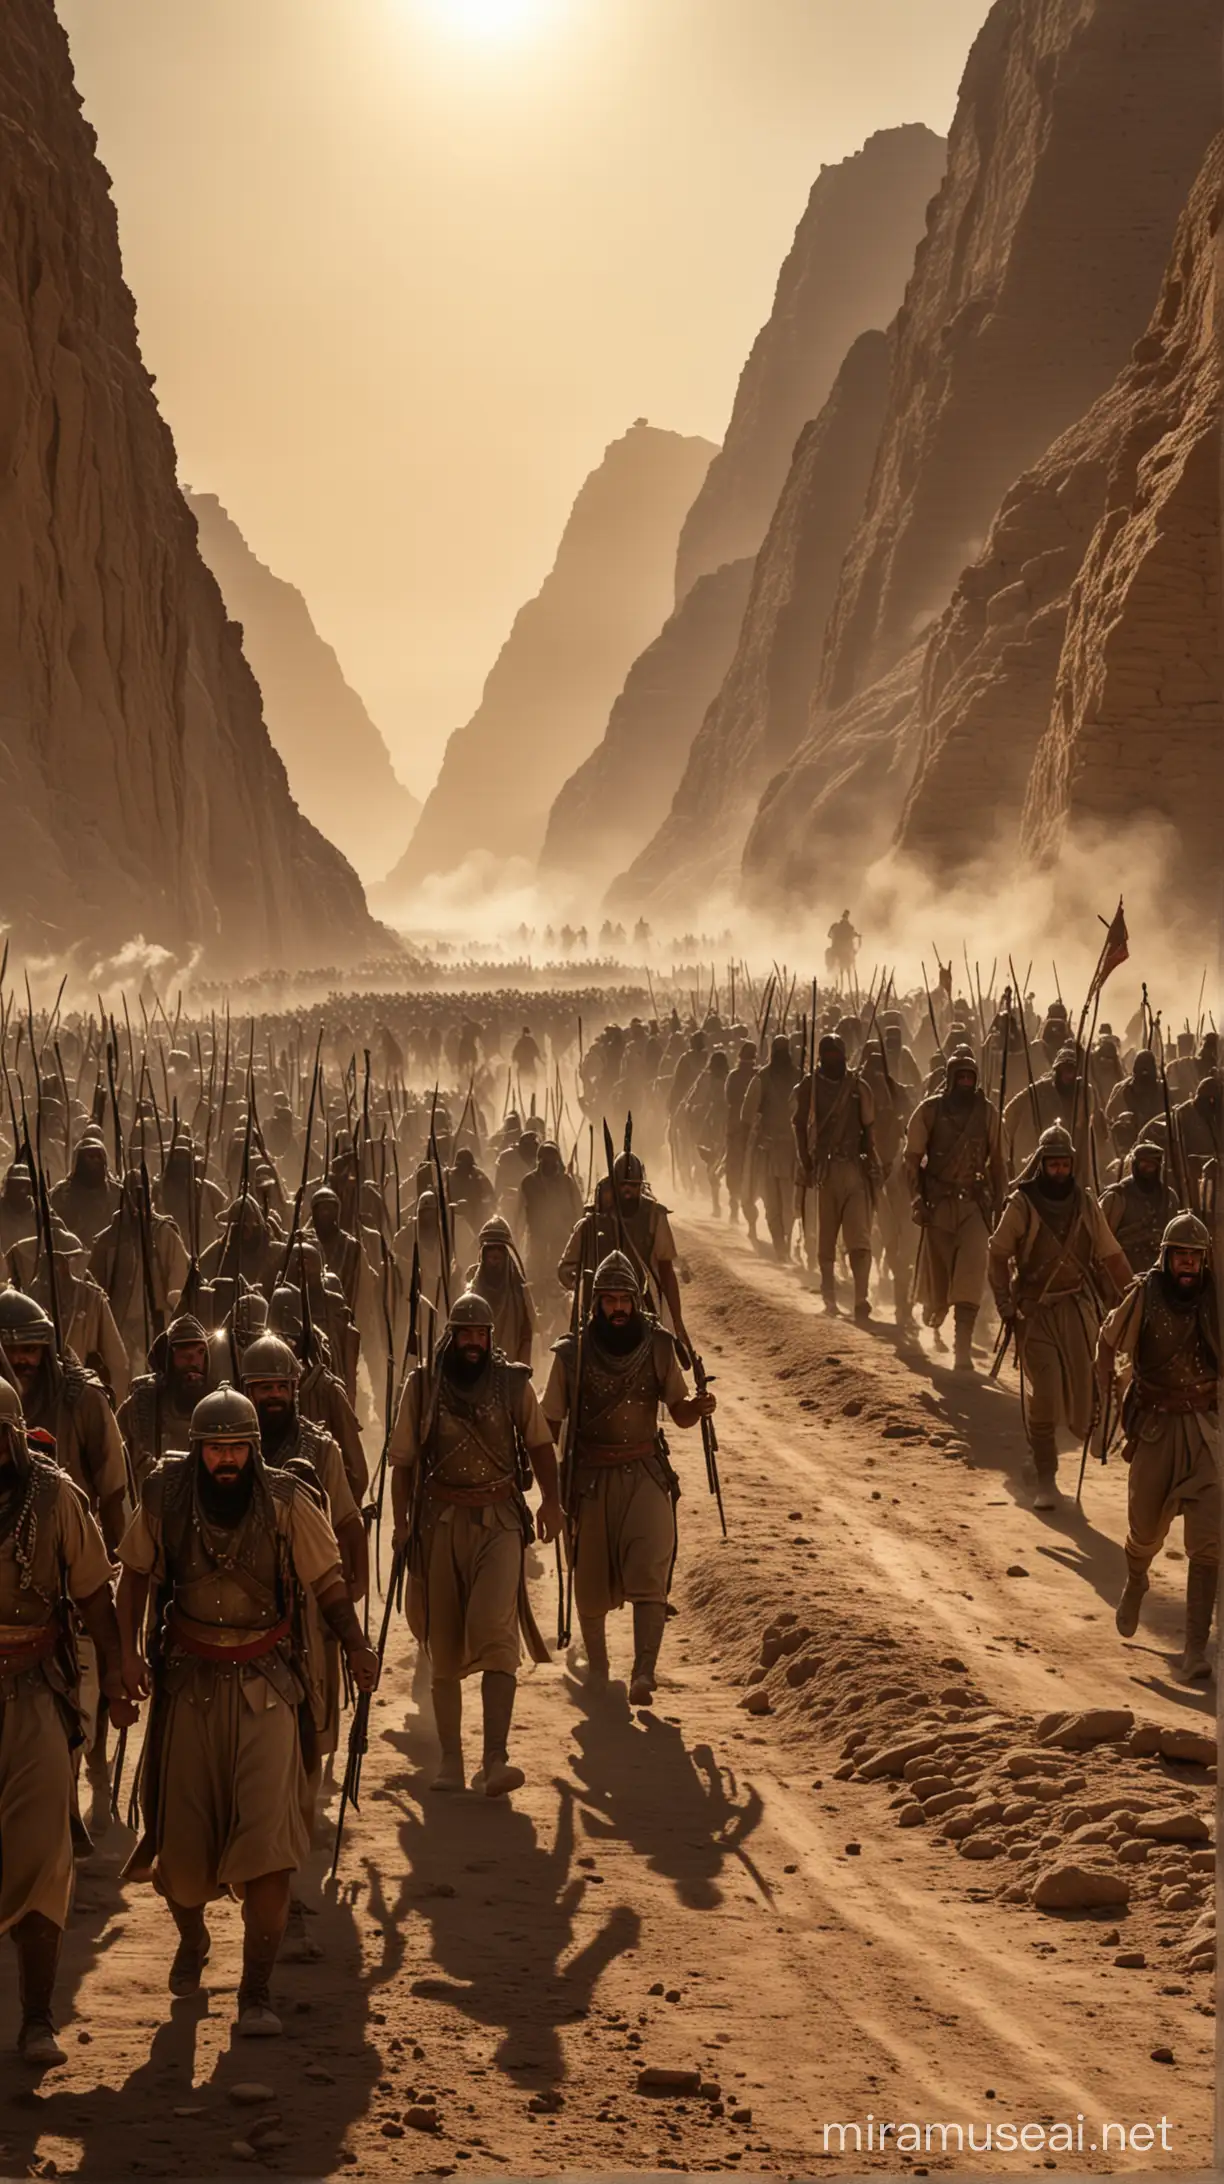 A scene of war depicts the Persian army marching into Egypt under the command of the Persian king. Pers soldiers prepare for battle, shouting war cries as they advance. In the backdrop, the silhouette of Egypt becomes clearer, while chaos and struggle dominate the atmosphere of the scene.





